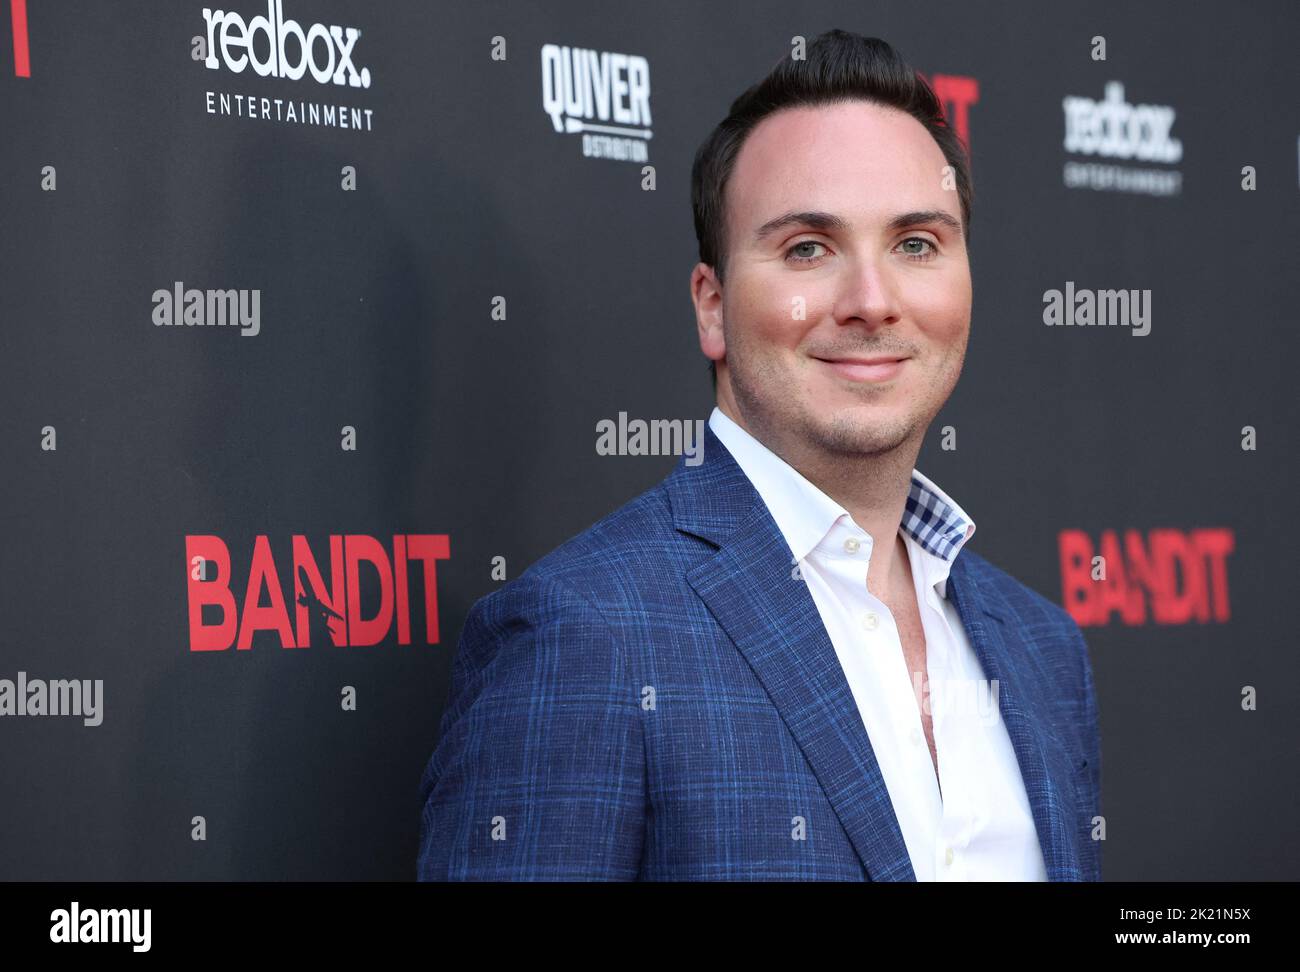 Director Allan Ungar attends a premiere for the film 'Bandit' in Los Angeles, California, U.S. September 21, 2022.  REUTERS/Mario Anzuoni Stock Photo